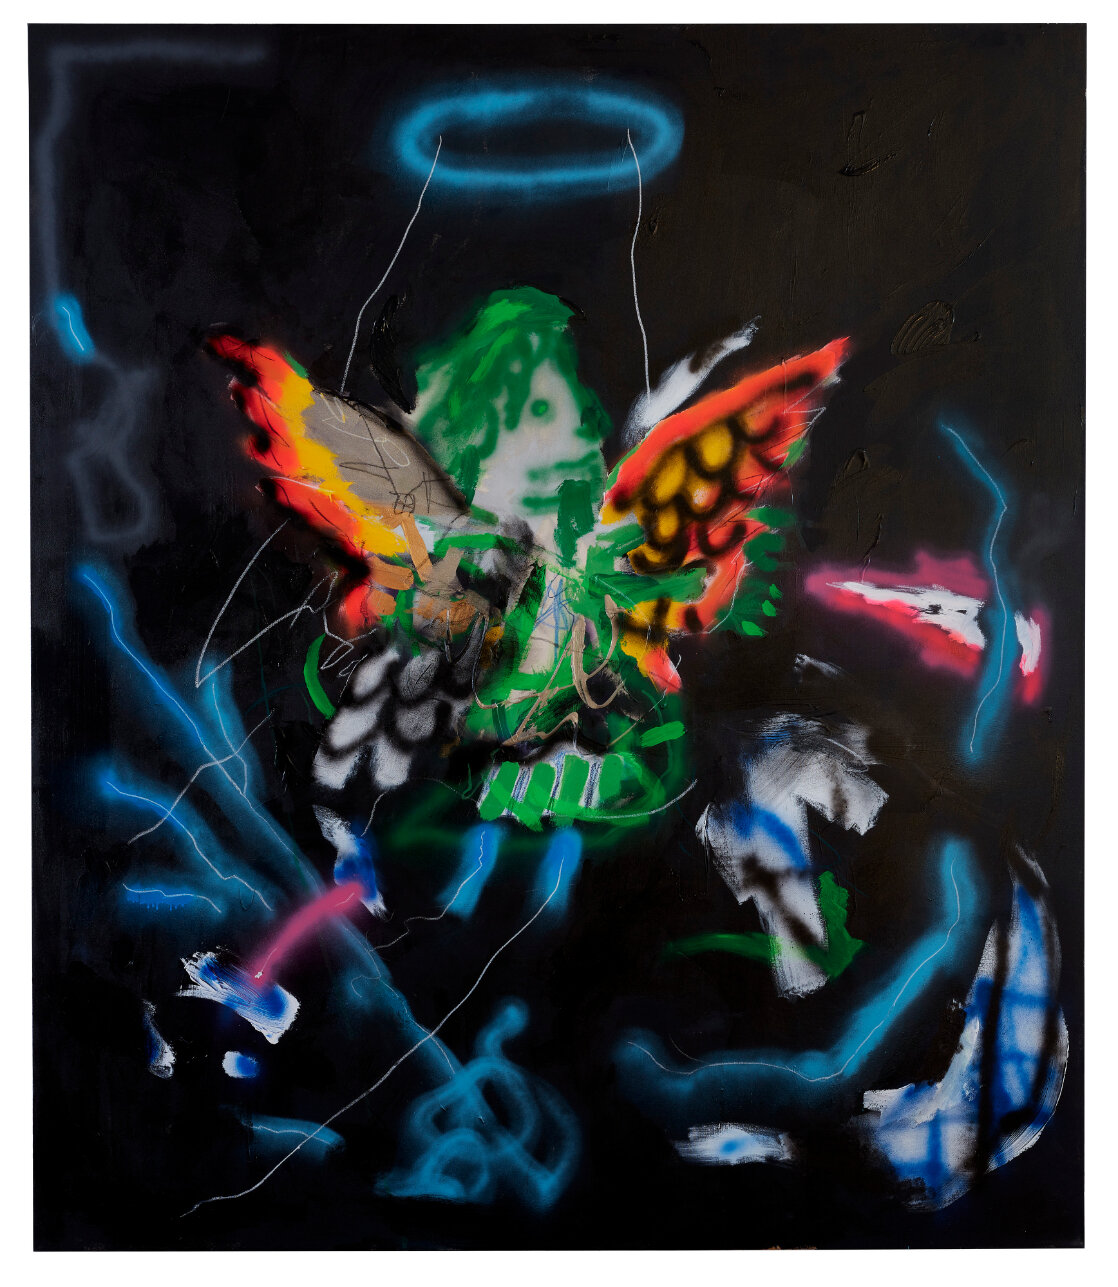  Robert Nava  Night Storm Angel , 2020 Acrylic, grease pencil, and crayon on canvas  85 x 73 inches (215.9 cm x 185.4 cm) 